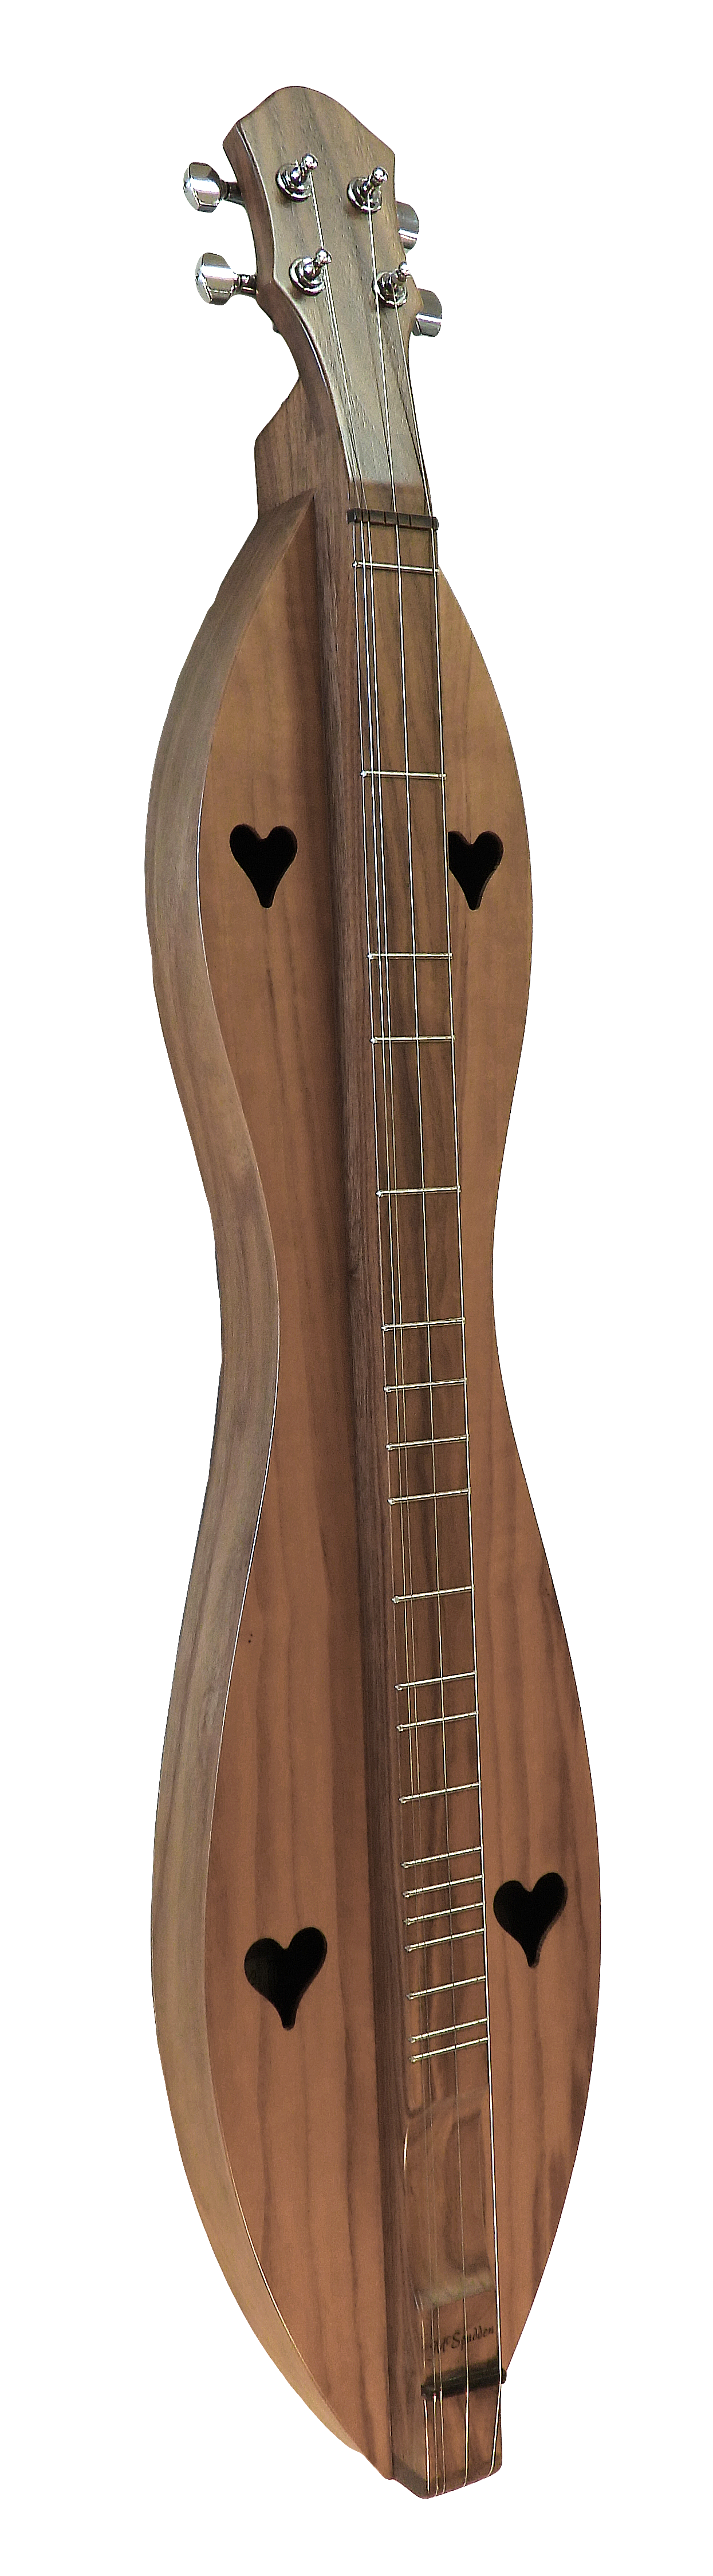 A 4 String, Flathead, Hourglass with Walnut back, sides and top wooden ukulele with black birds on it, featuring a lifetime warranty.